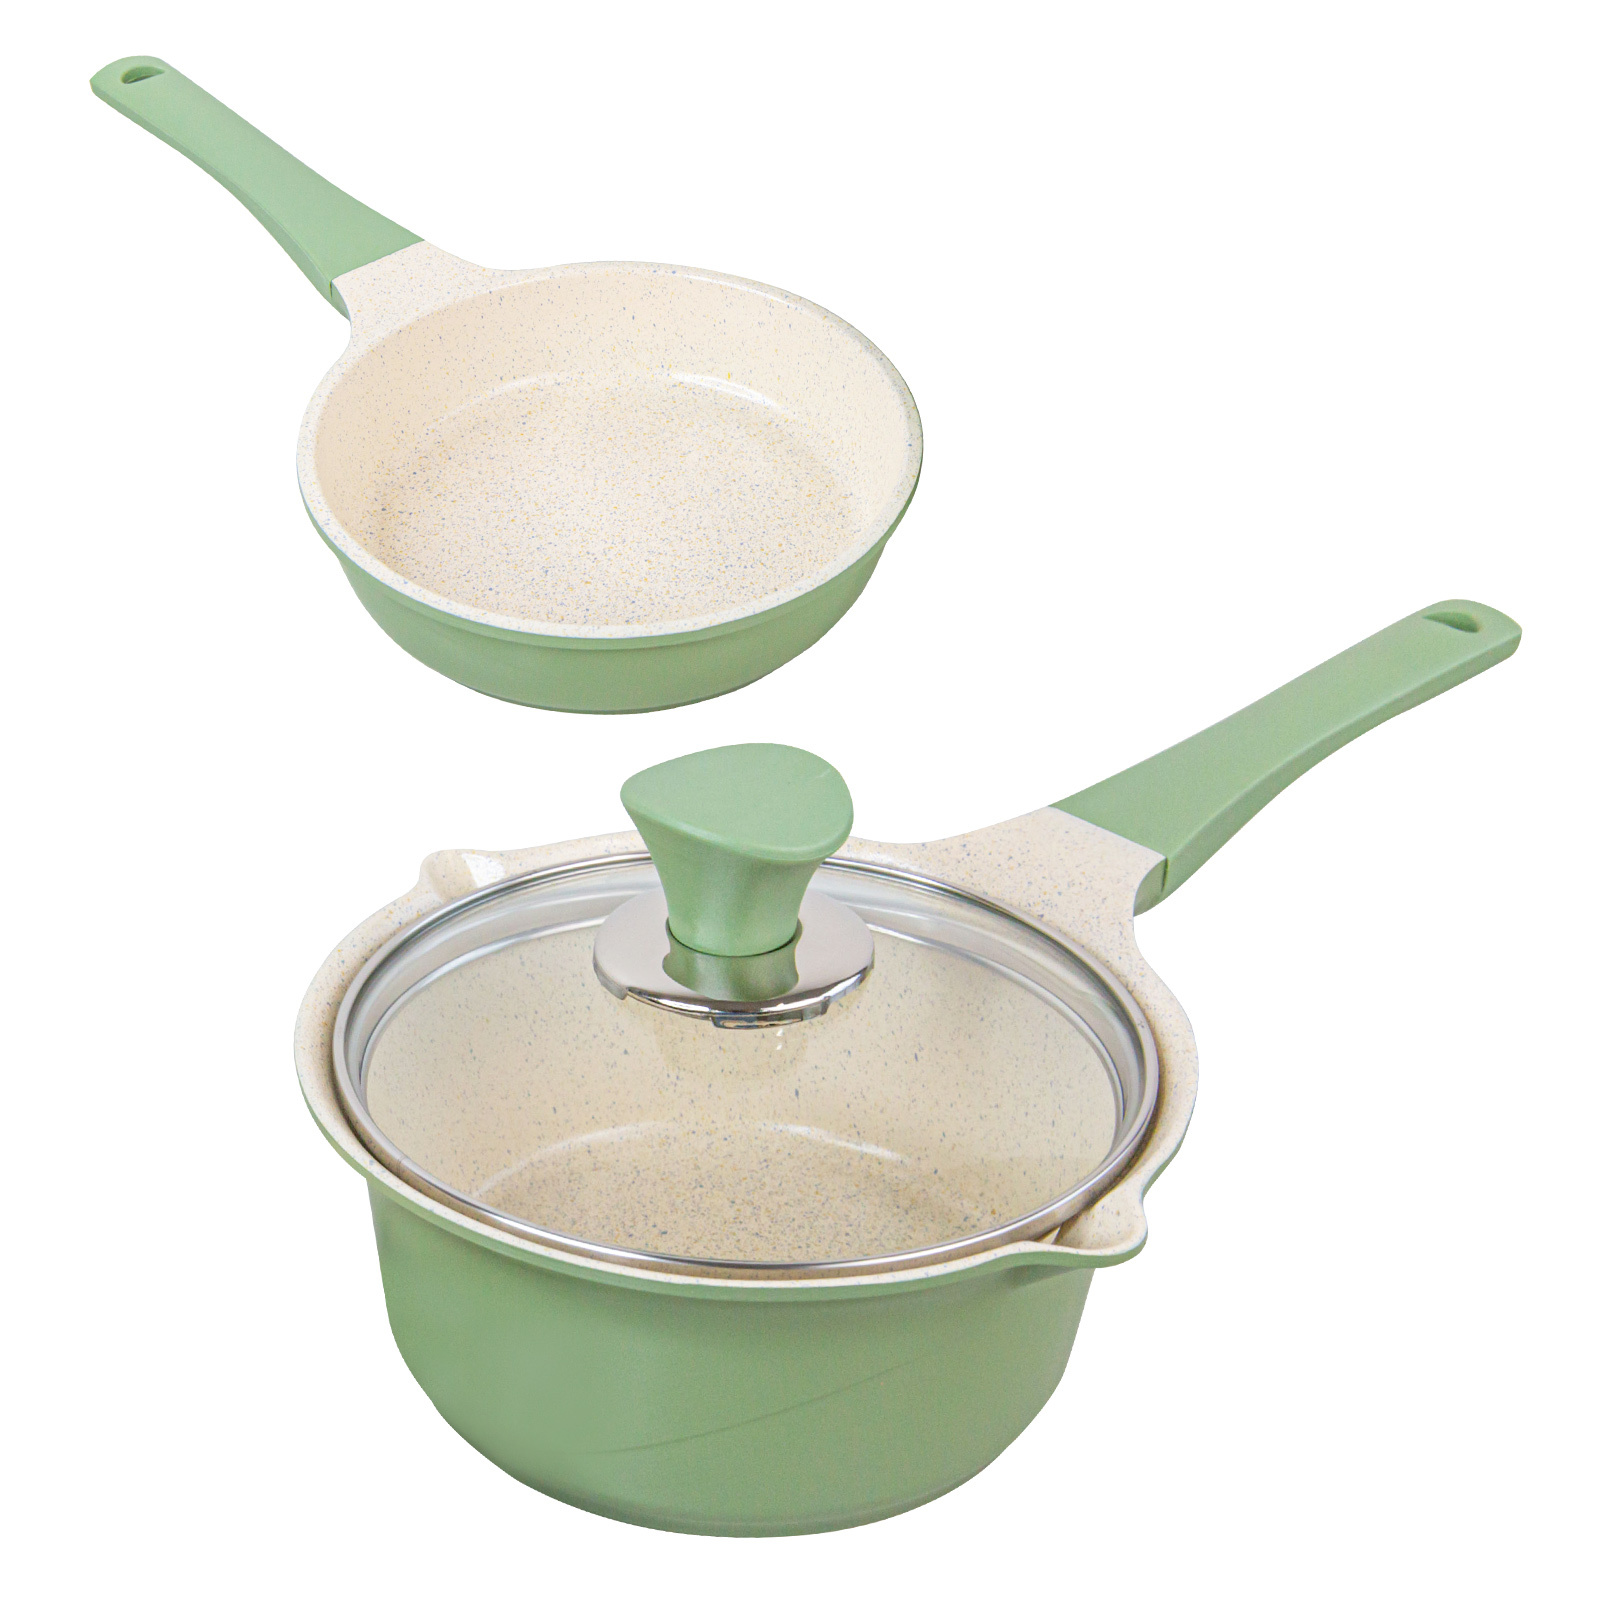 16cm Sauce Pot and Stone Frypan with a Lid - OLIVE